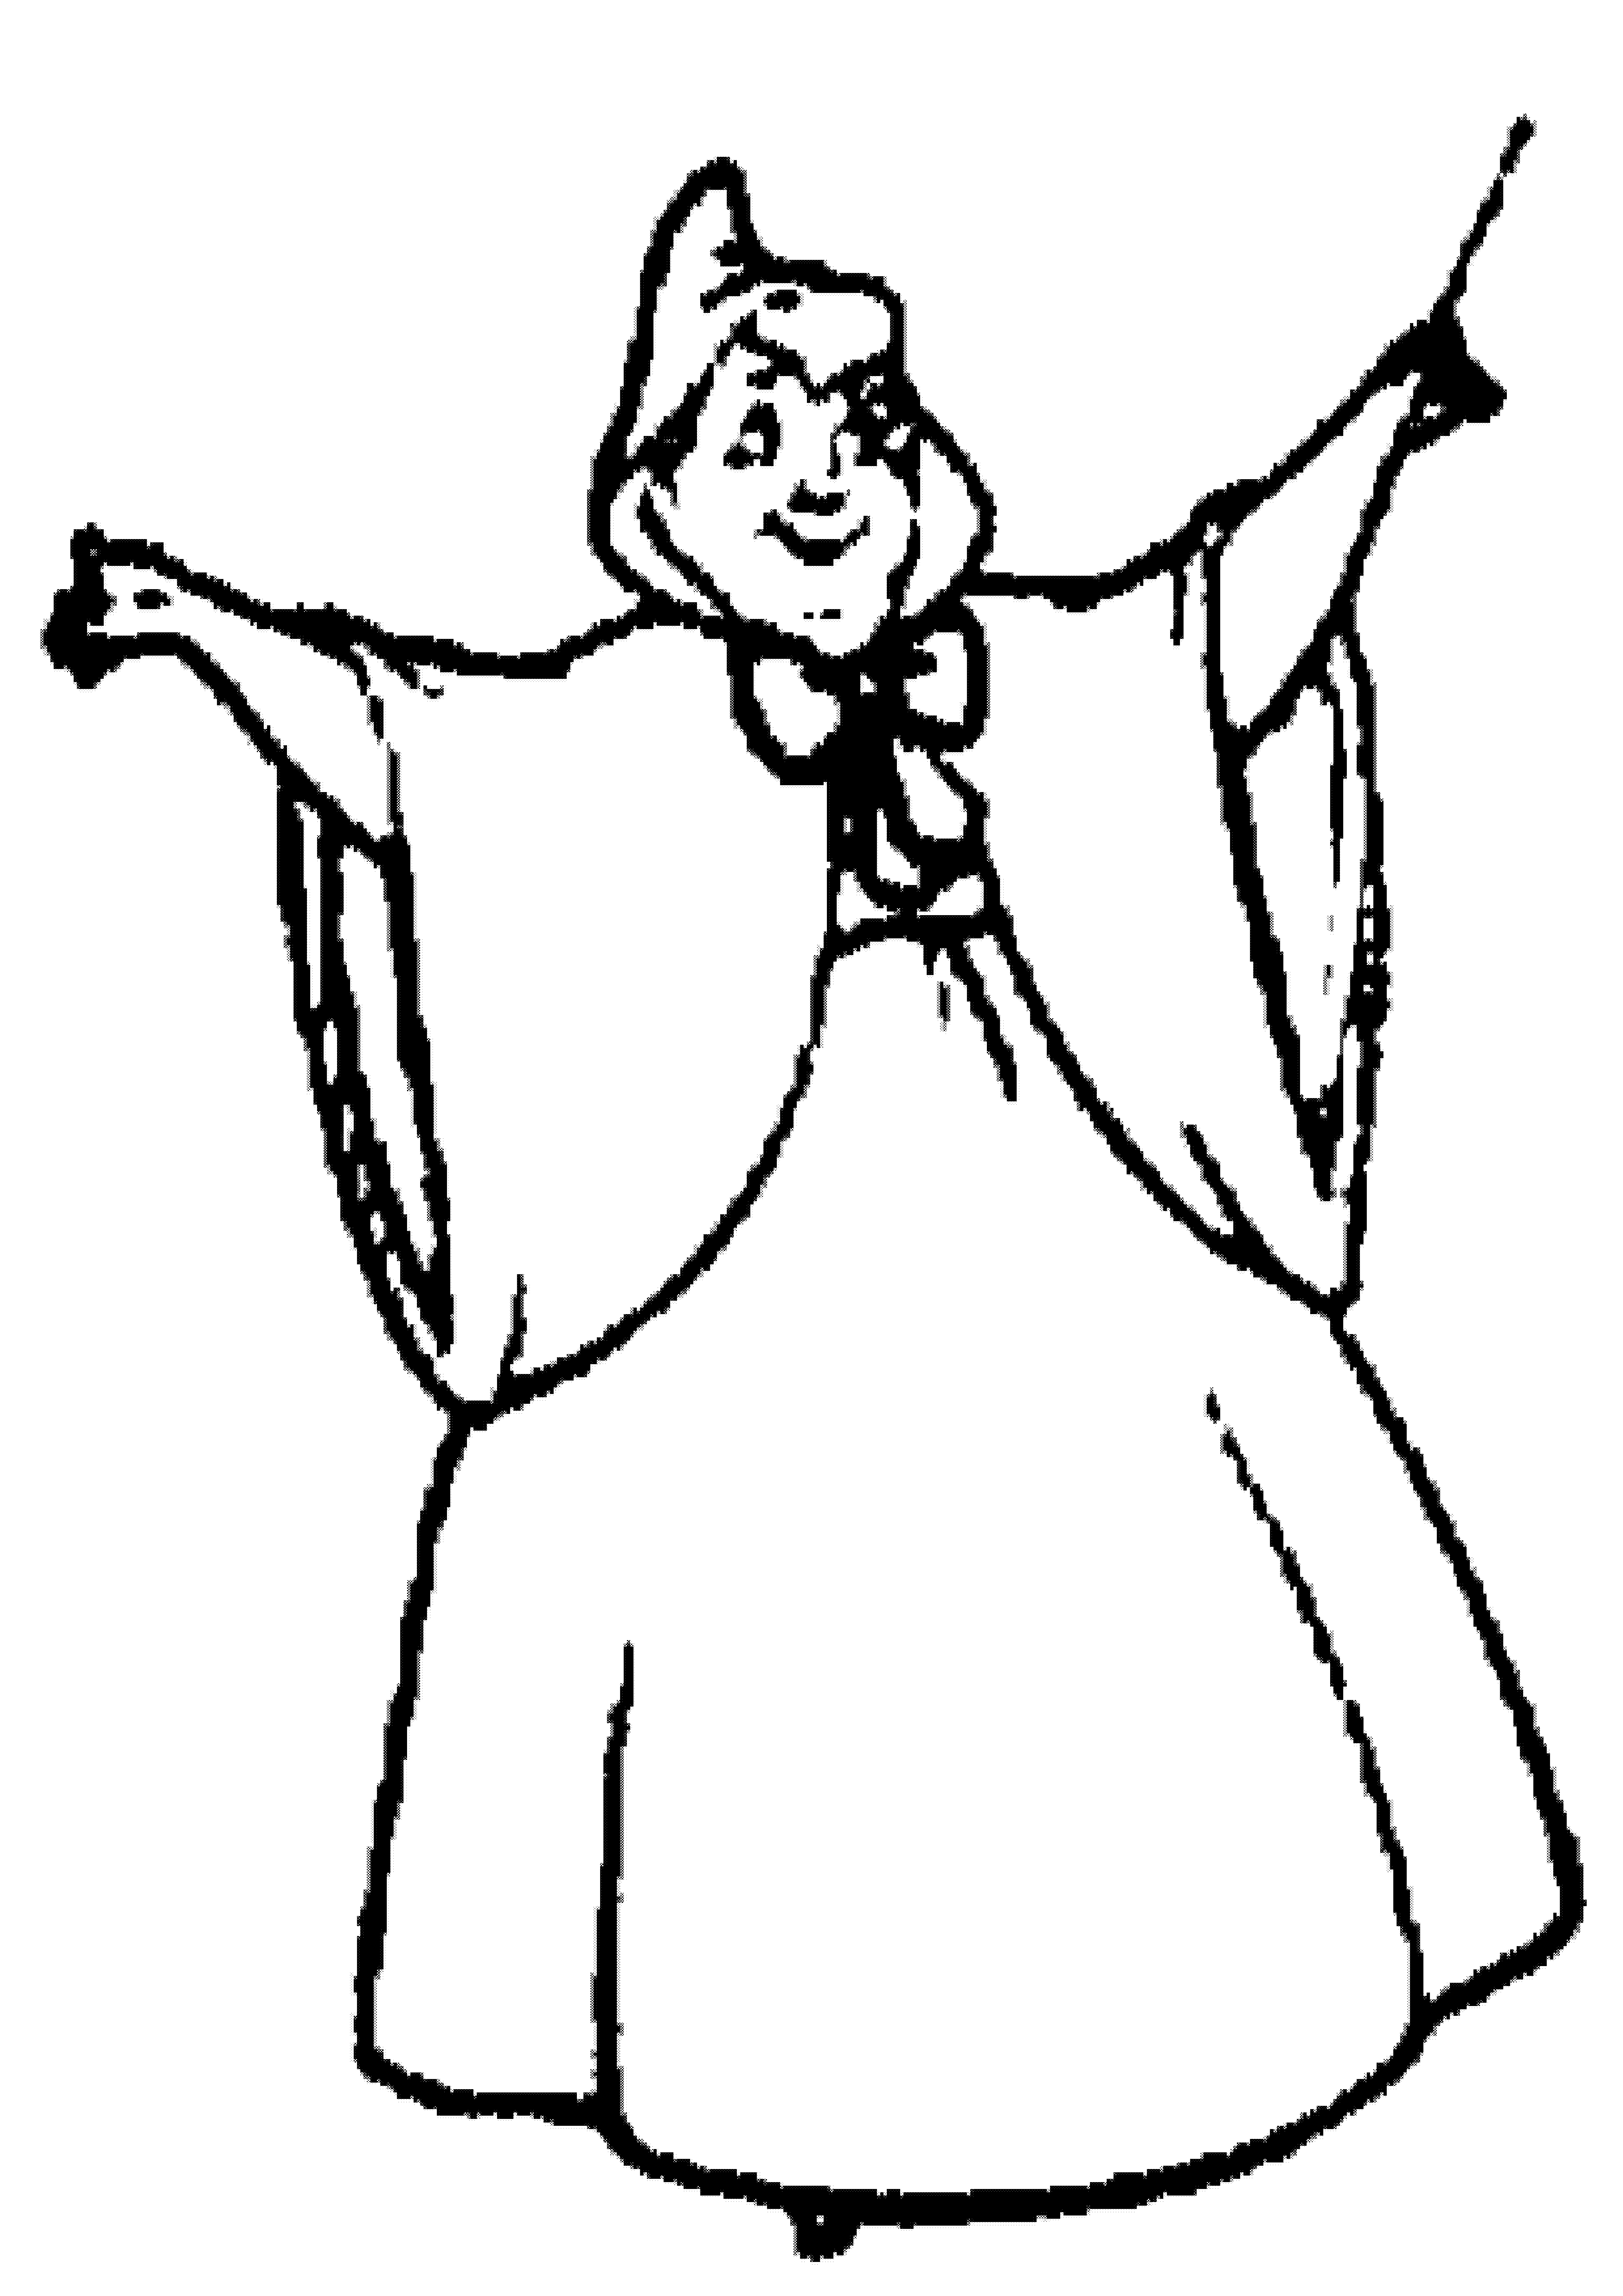 Free Fairy Godmother Cliparts, Download Free Clip Art, Free Clip Art.